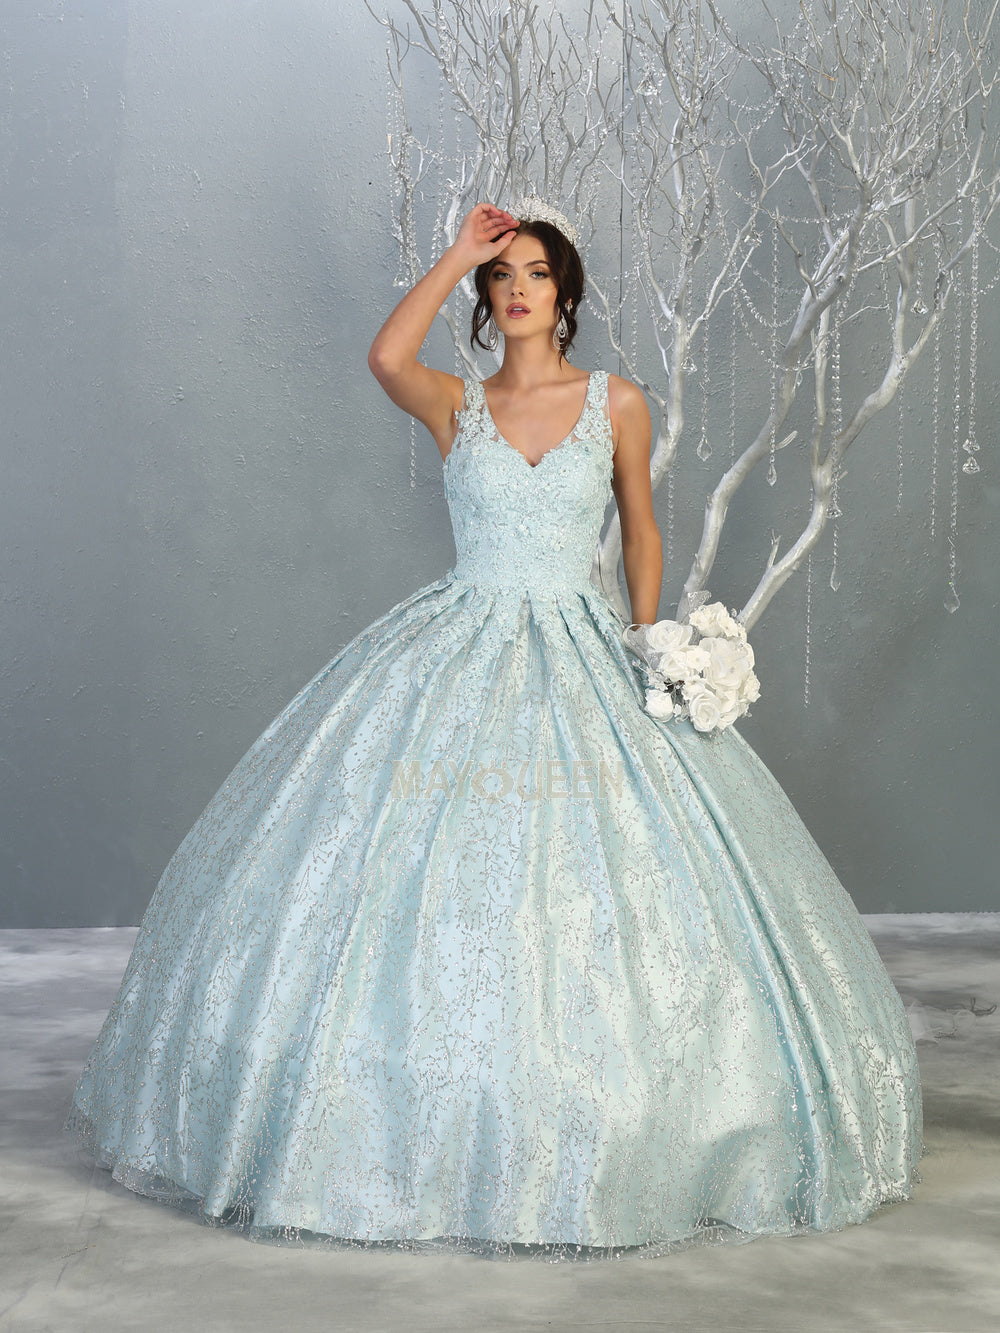 MQ LK149 - A Line Quinceanera Gown with Floral Applique Bodice & Glitter Print Skirt PROM GOWN Mayqueen 2 BABY BLUE 